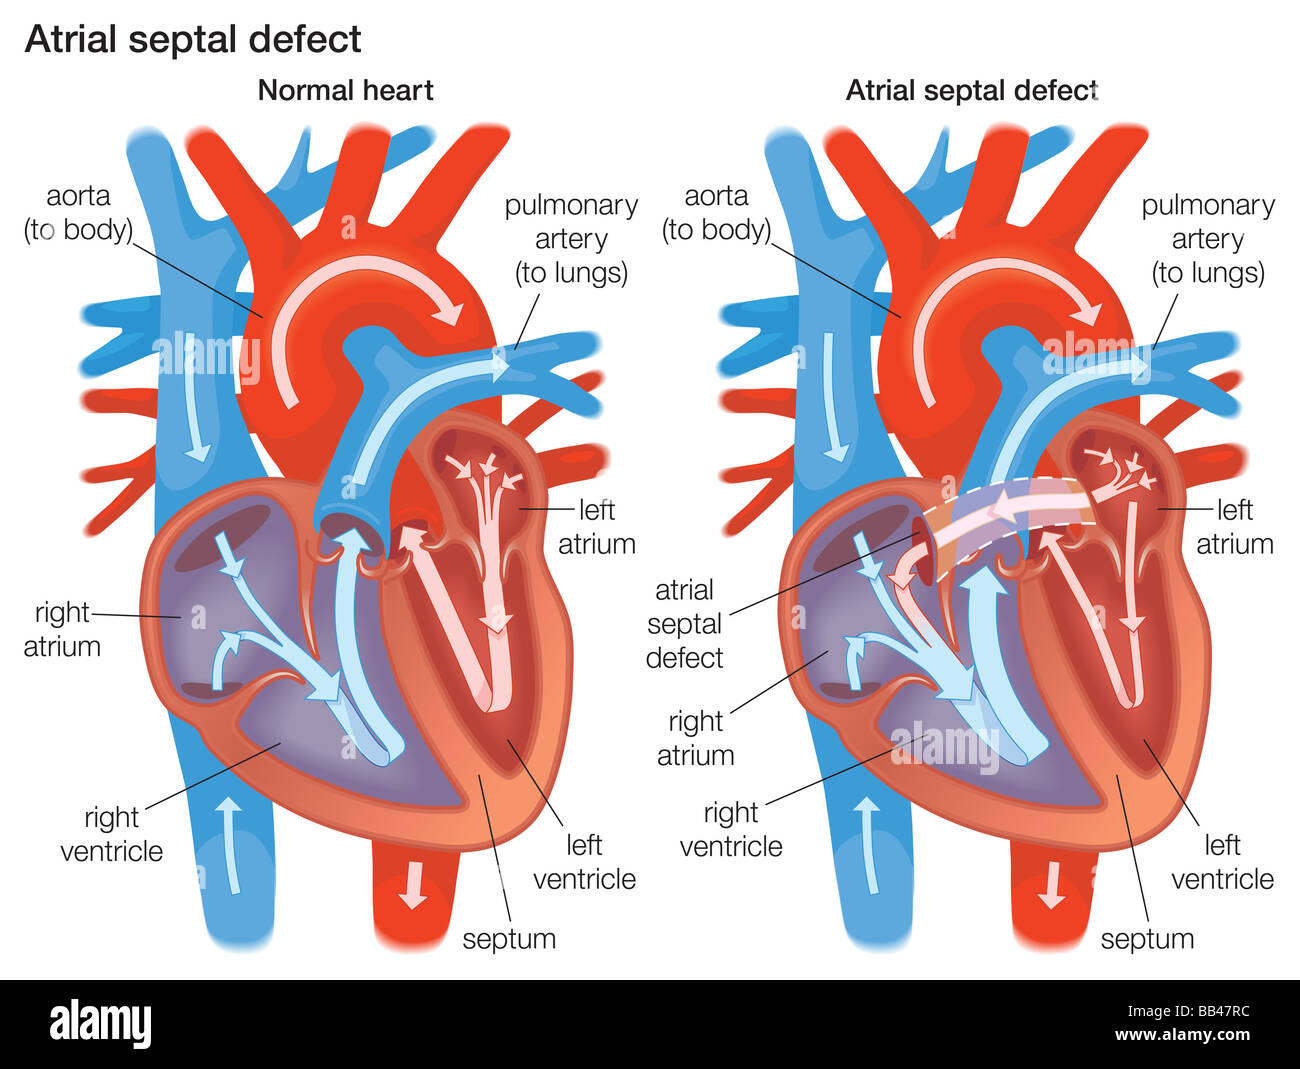 Diagram demonstrating the difference between a normal heart and a heart with an atrial septal defect Stock Photo